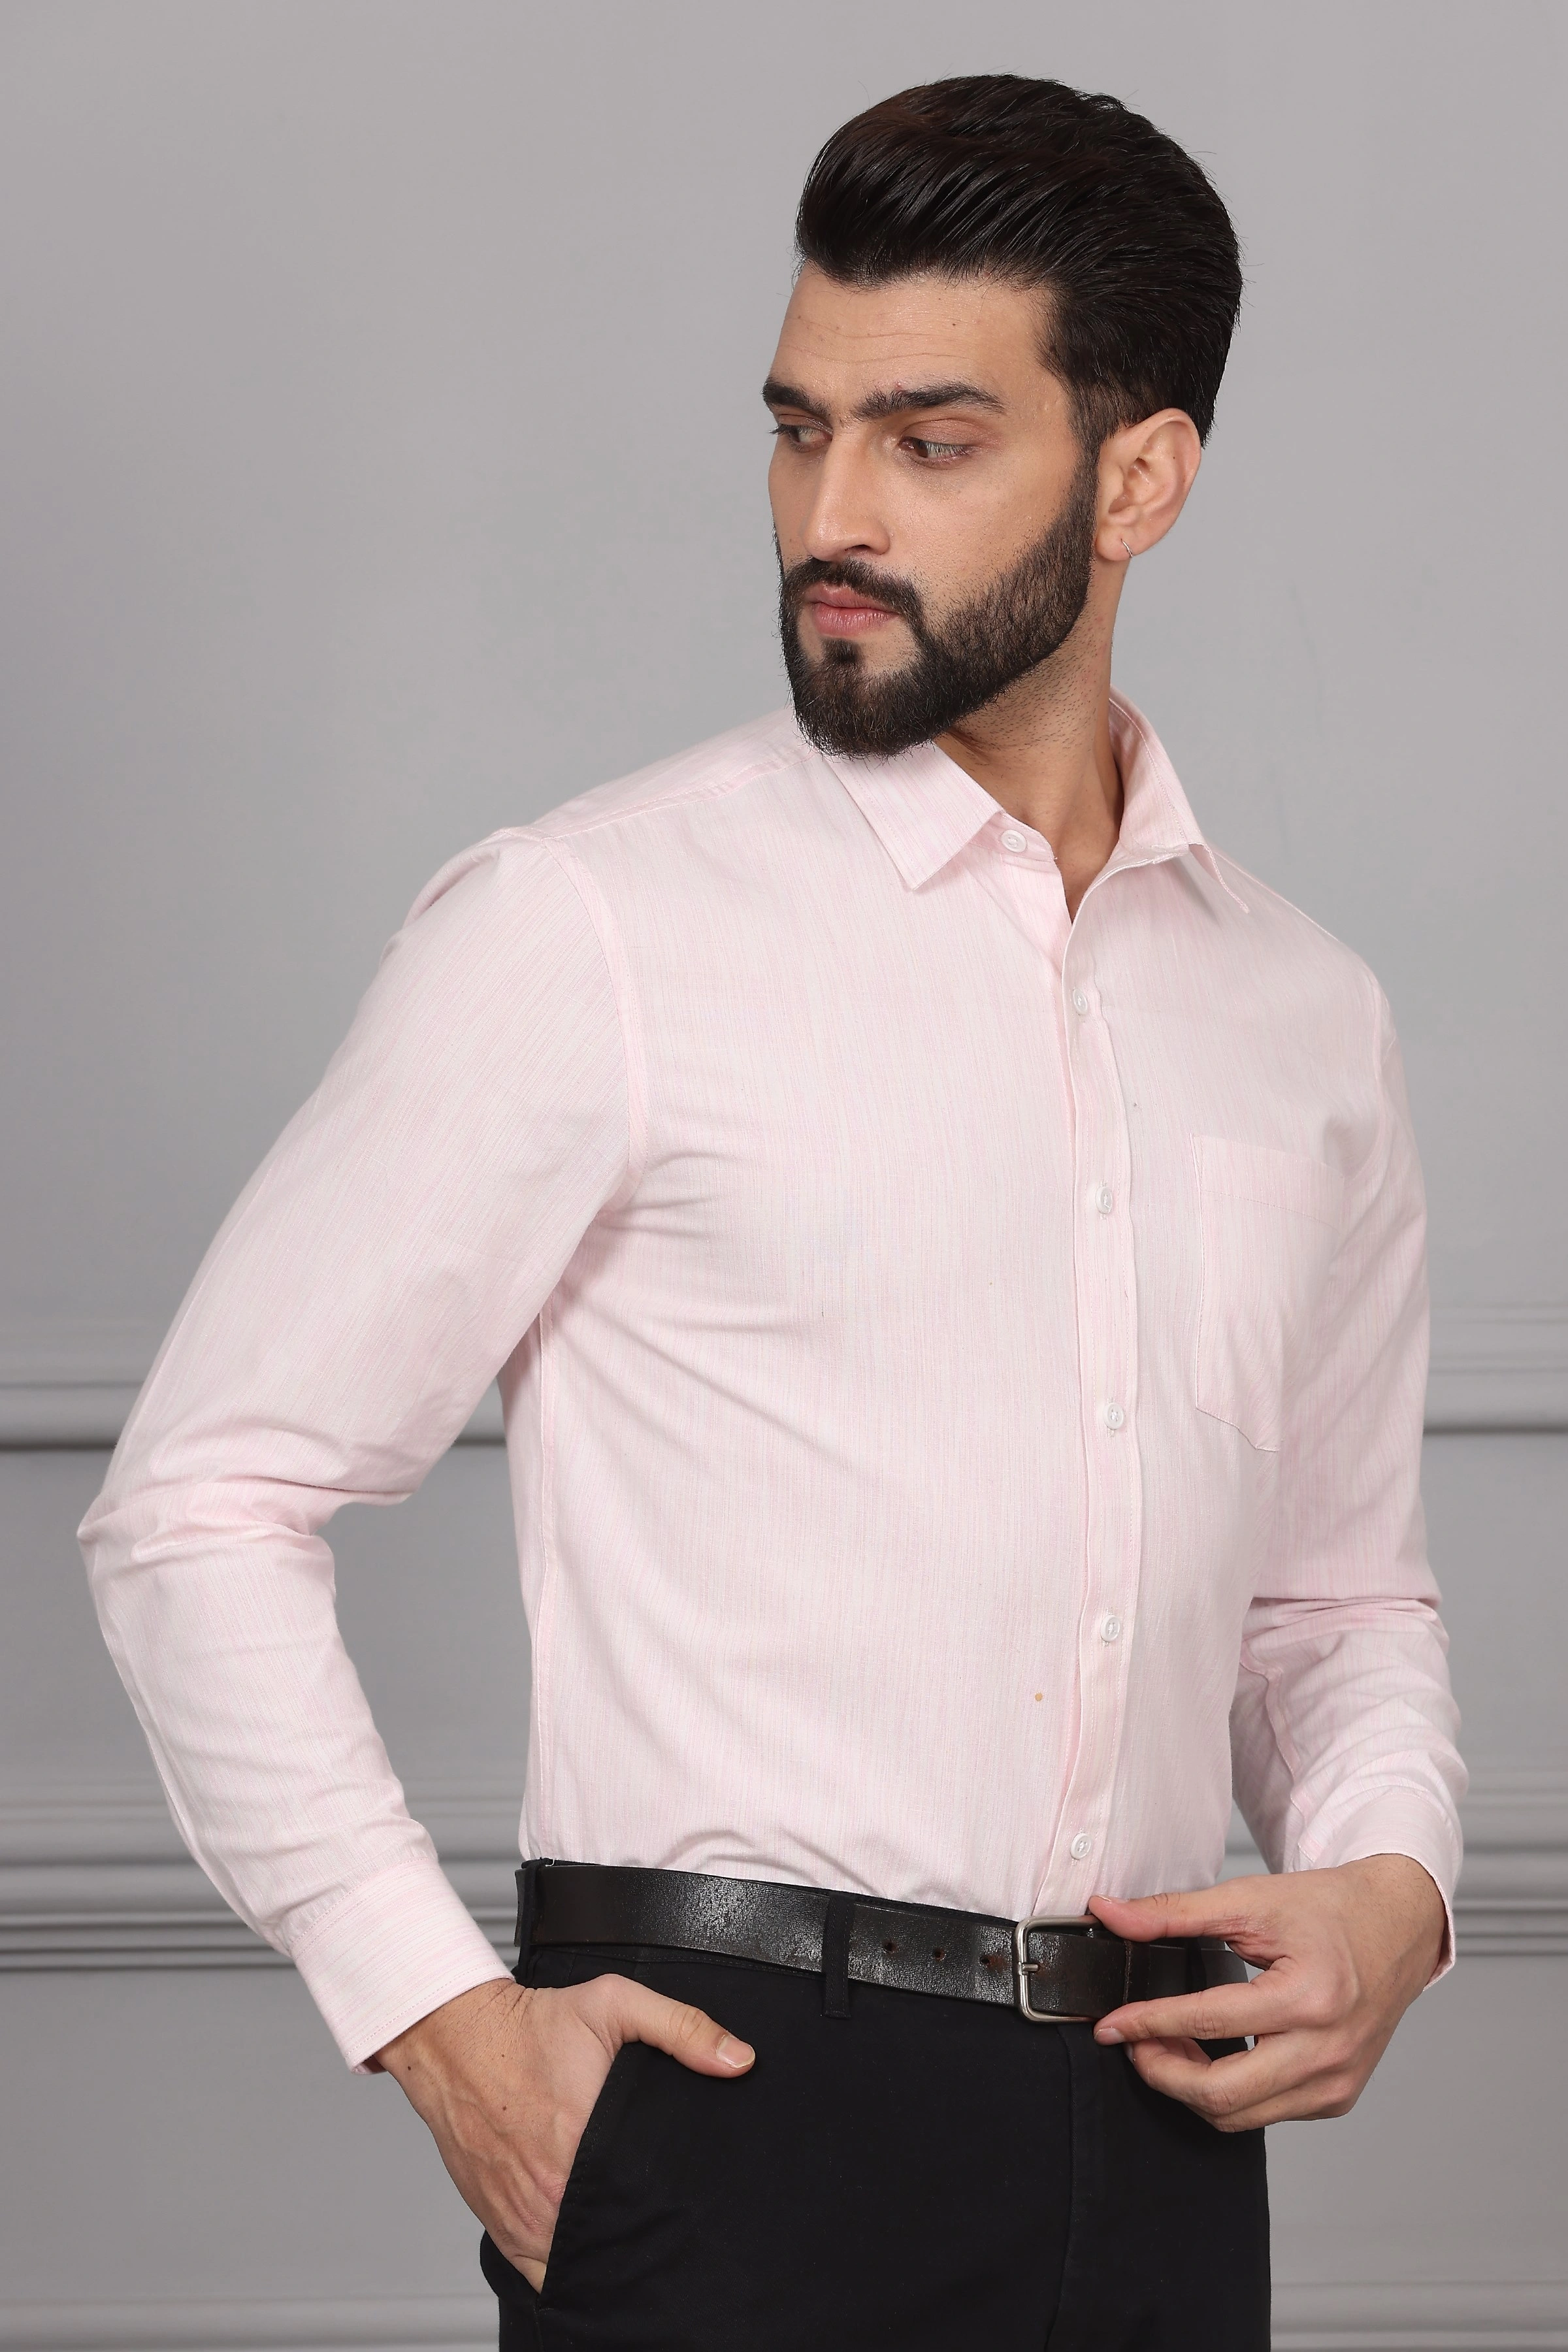 Textured Pink White Business Formal Cotton Shirt-S-2